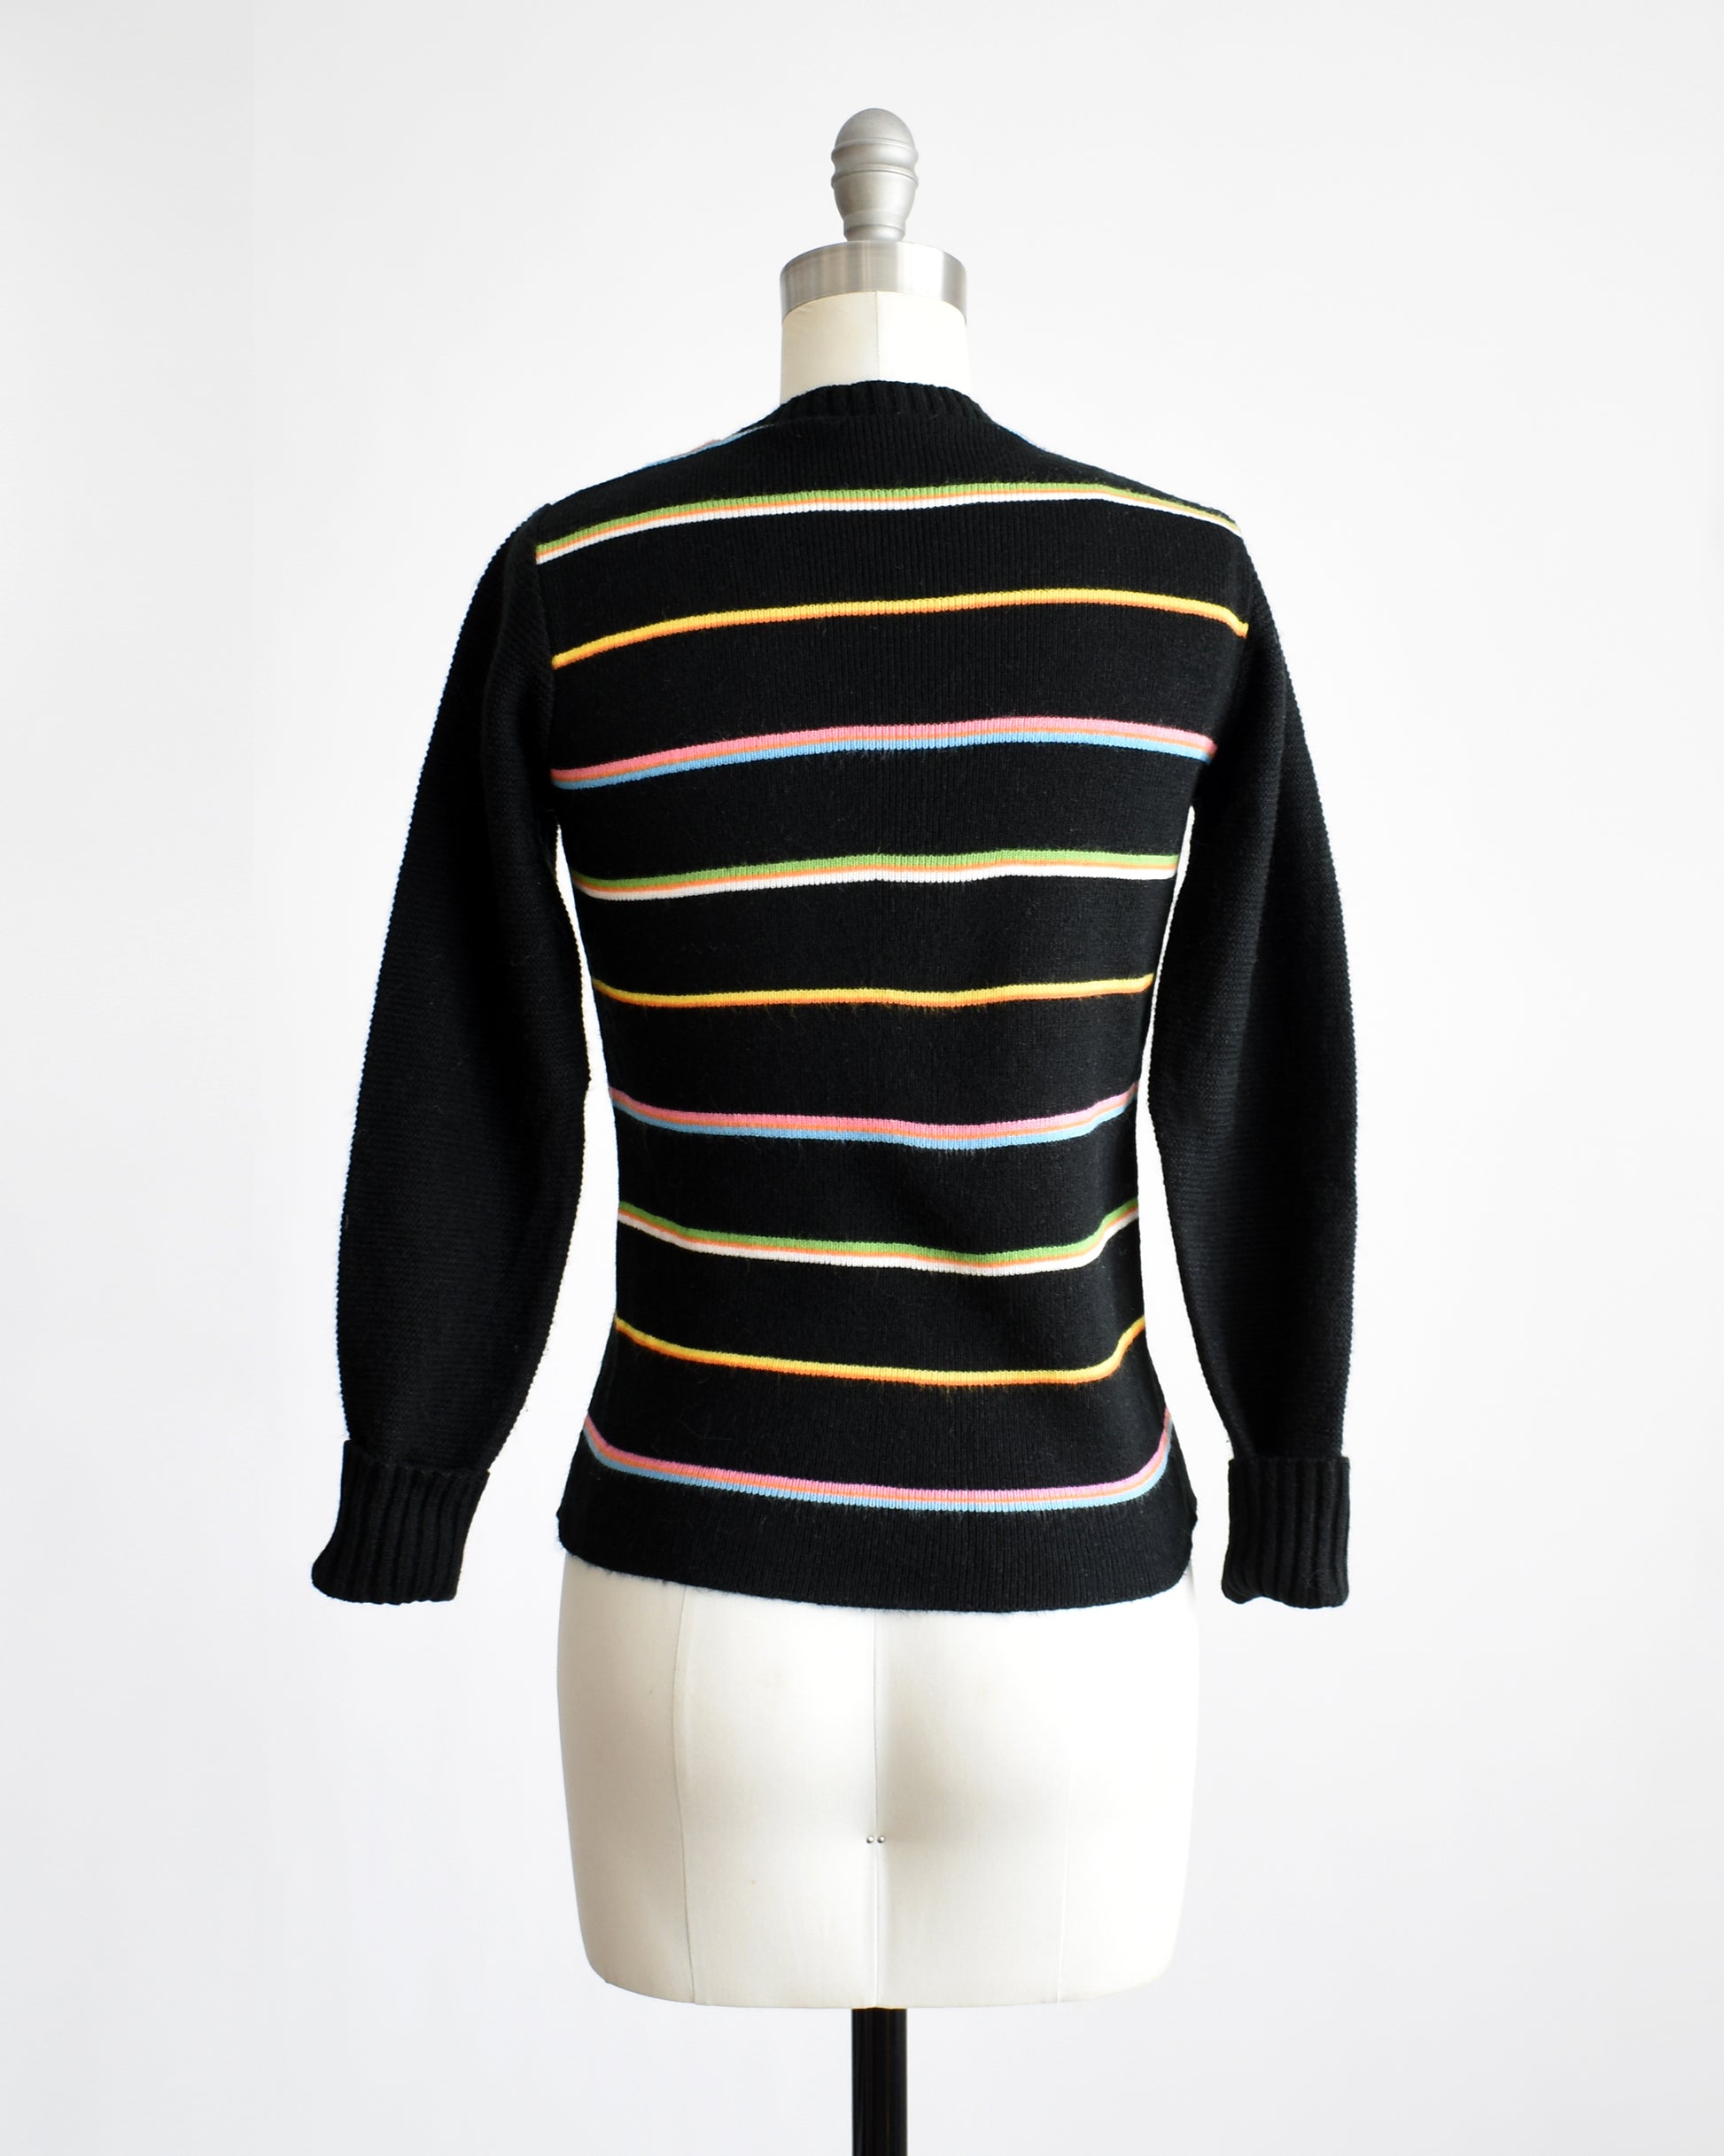 Back view of a vintage 1970s sweater that features black knit with horizontal rainbow stripes